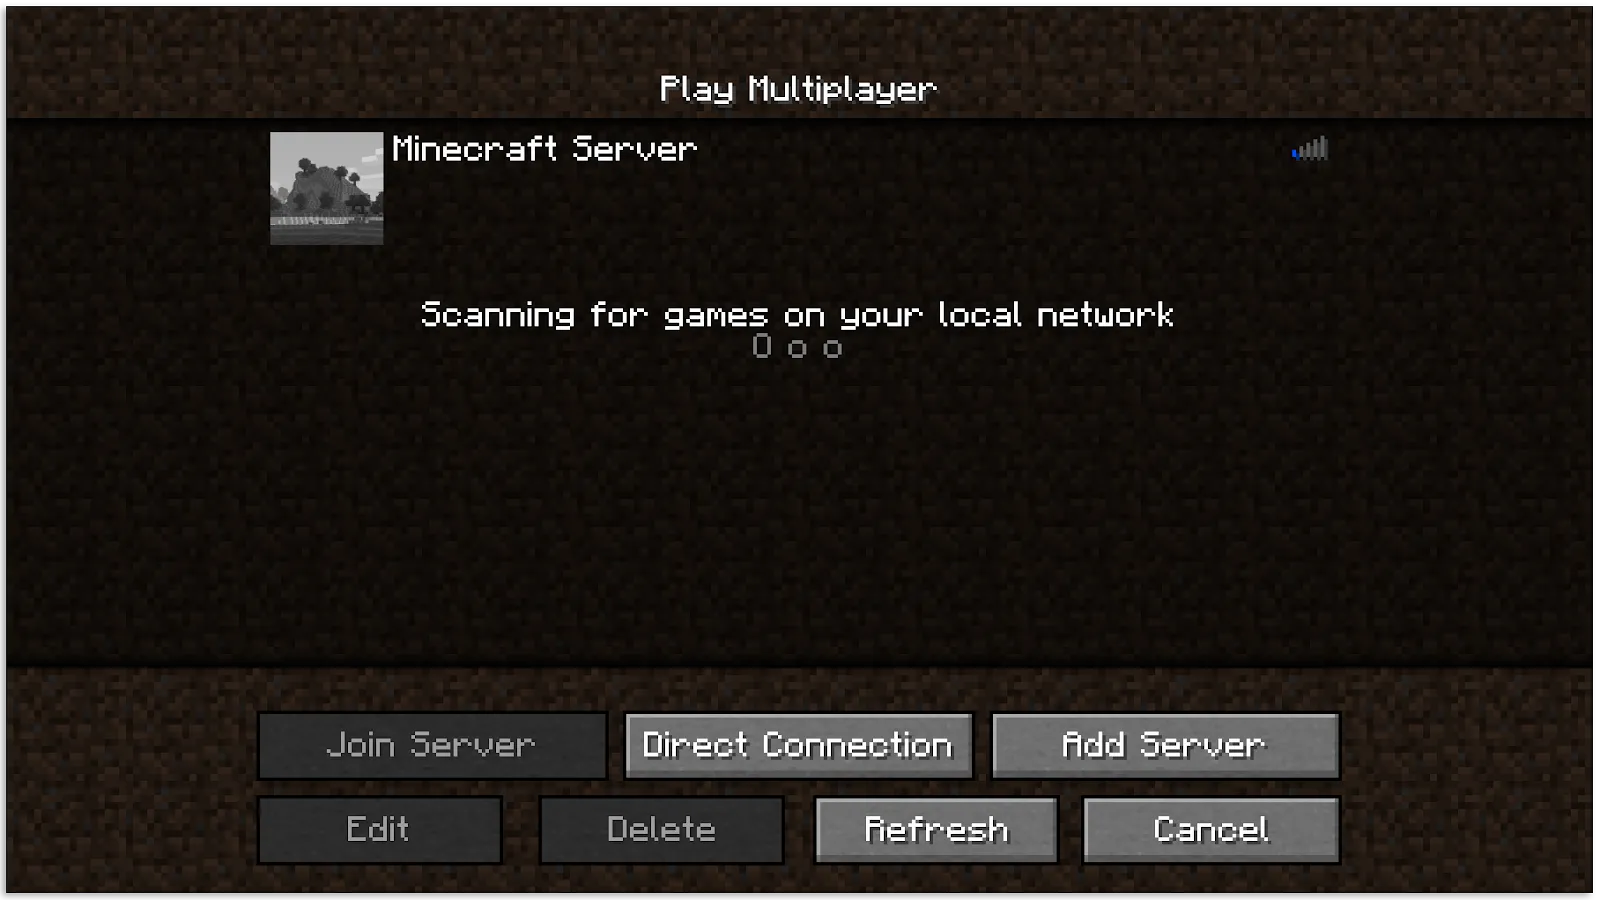 Image showing a server search screen in Minecraft